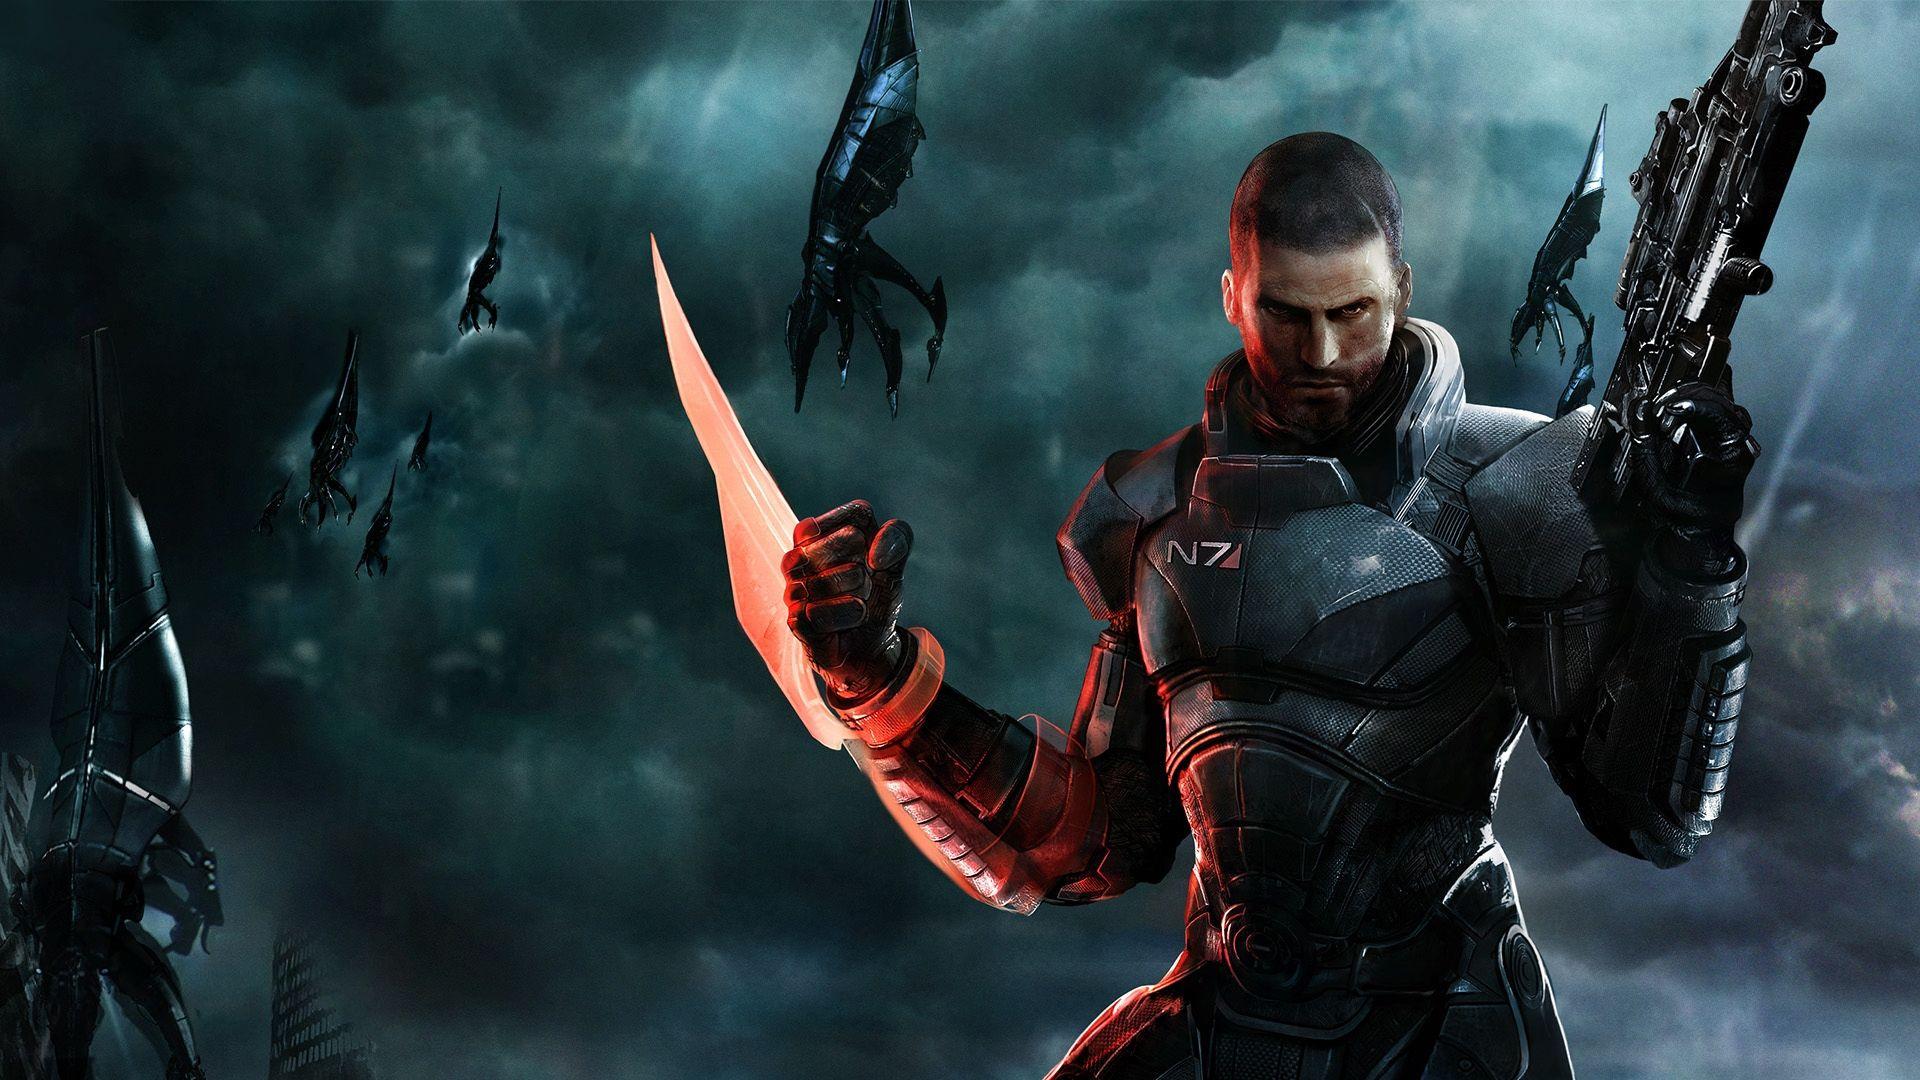 Mass Effect 3 Full HD Wallpaper and Background Imagex1080